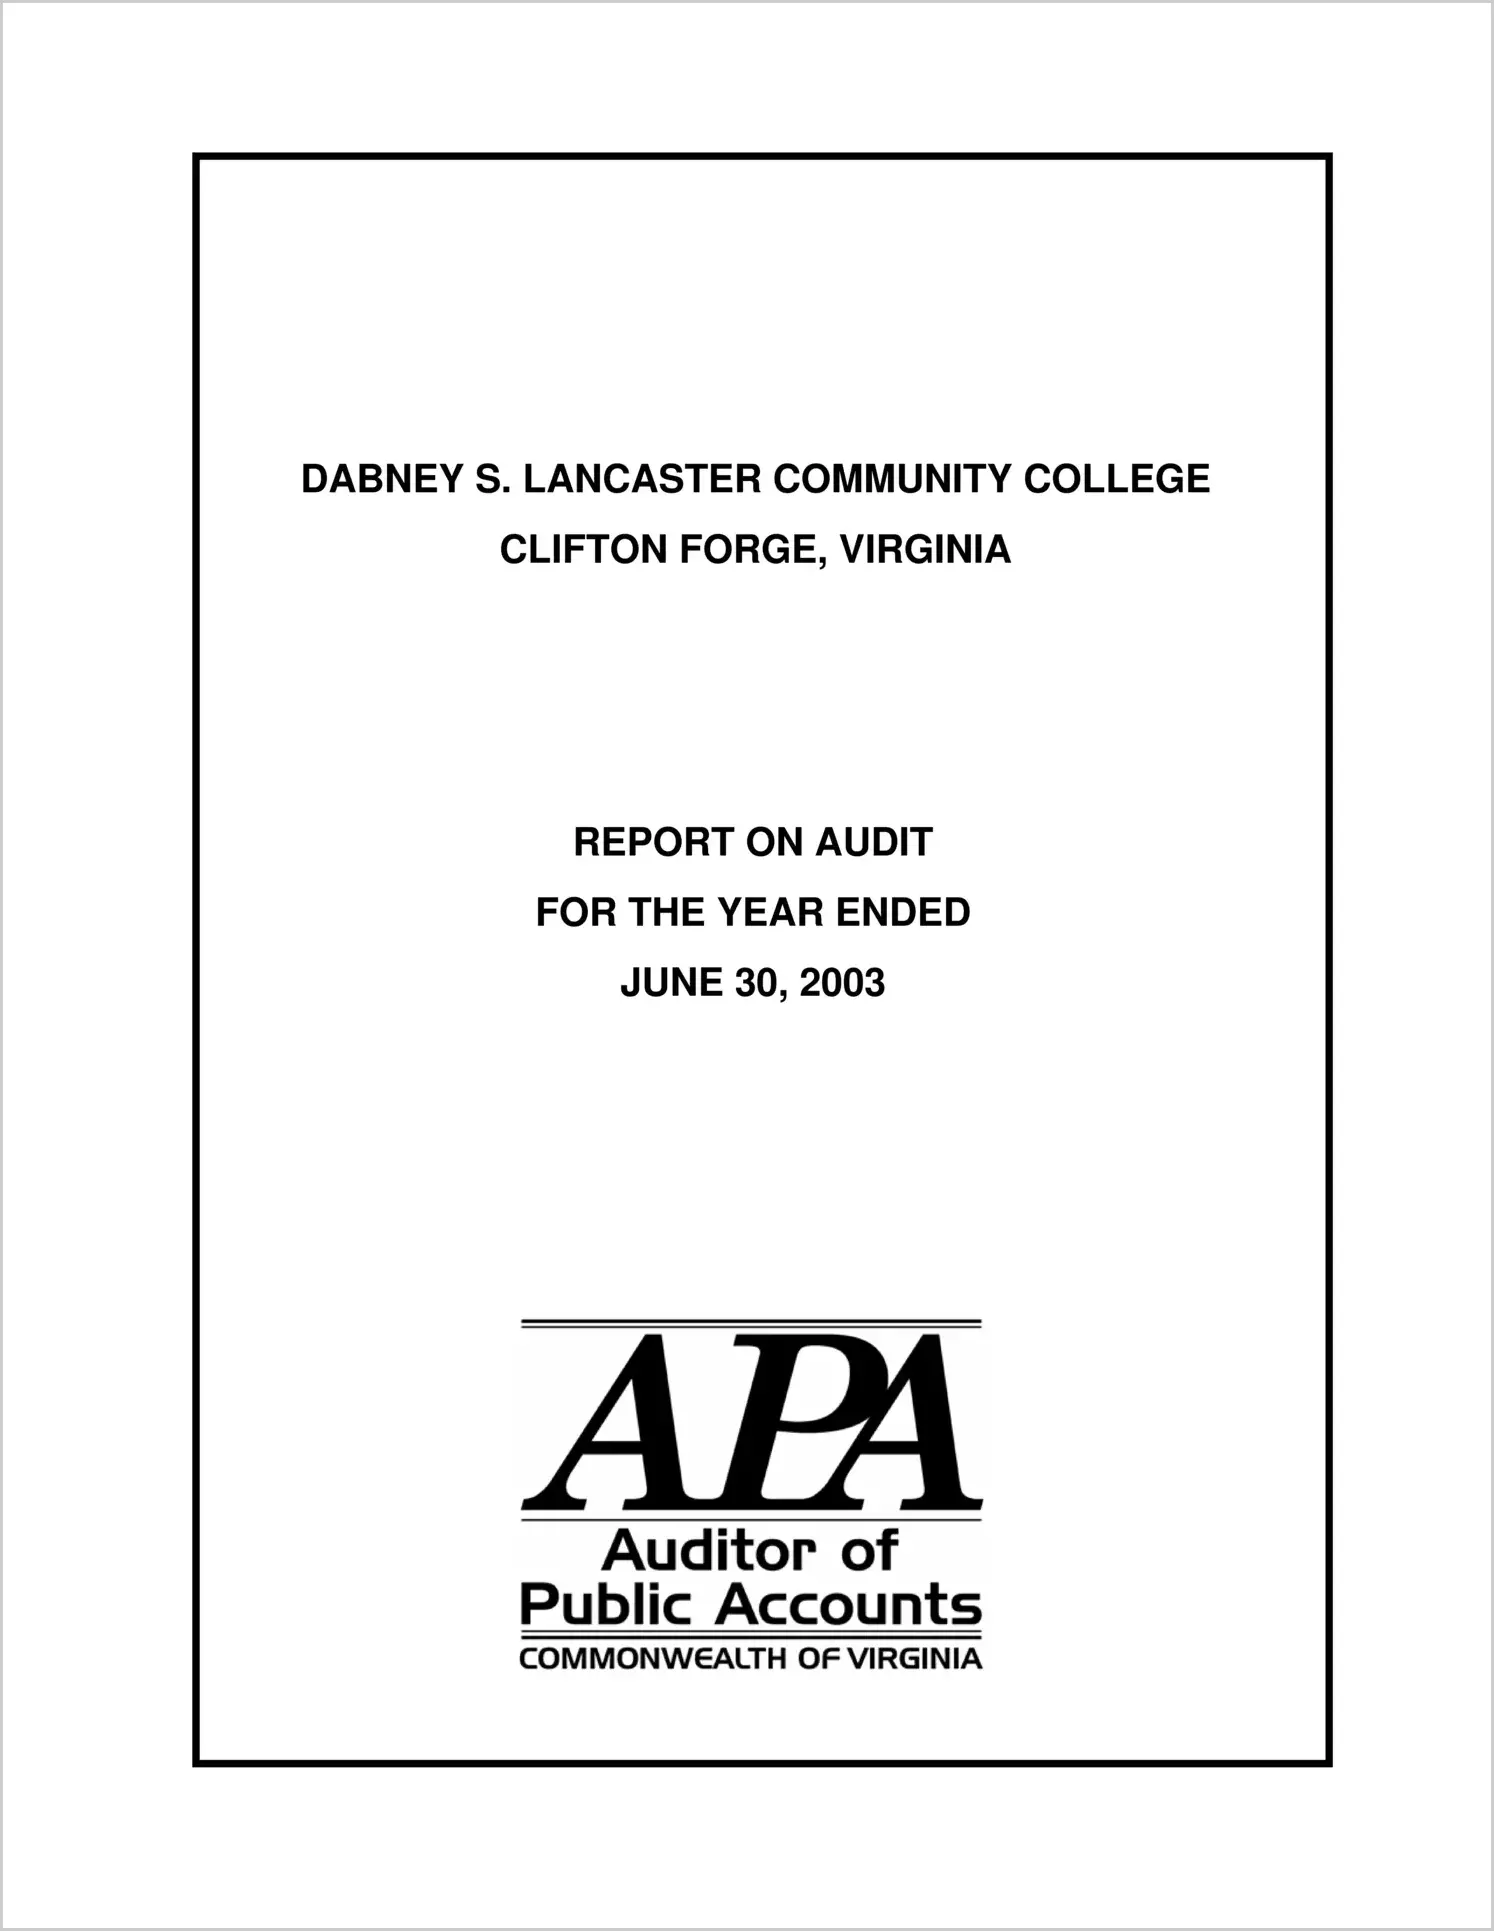 Dabney S. Lancaster Community College for the year ended June 30, 2003